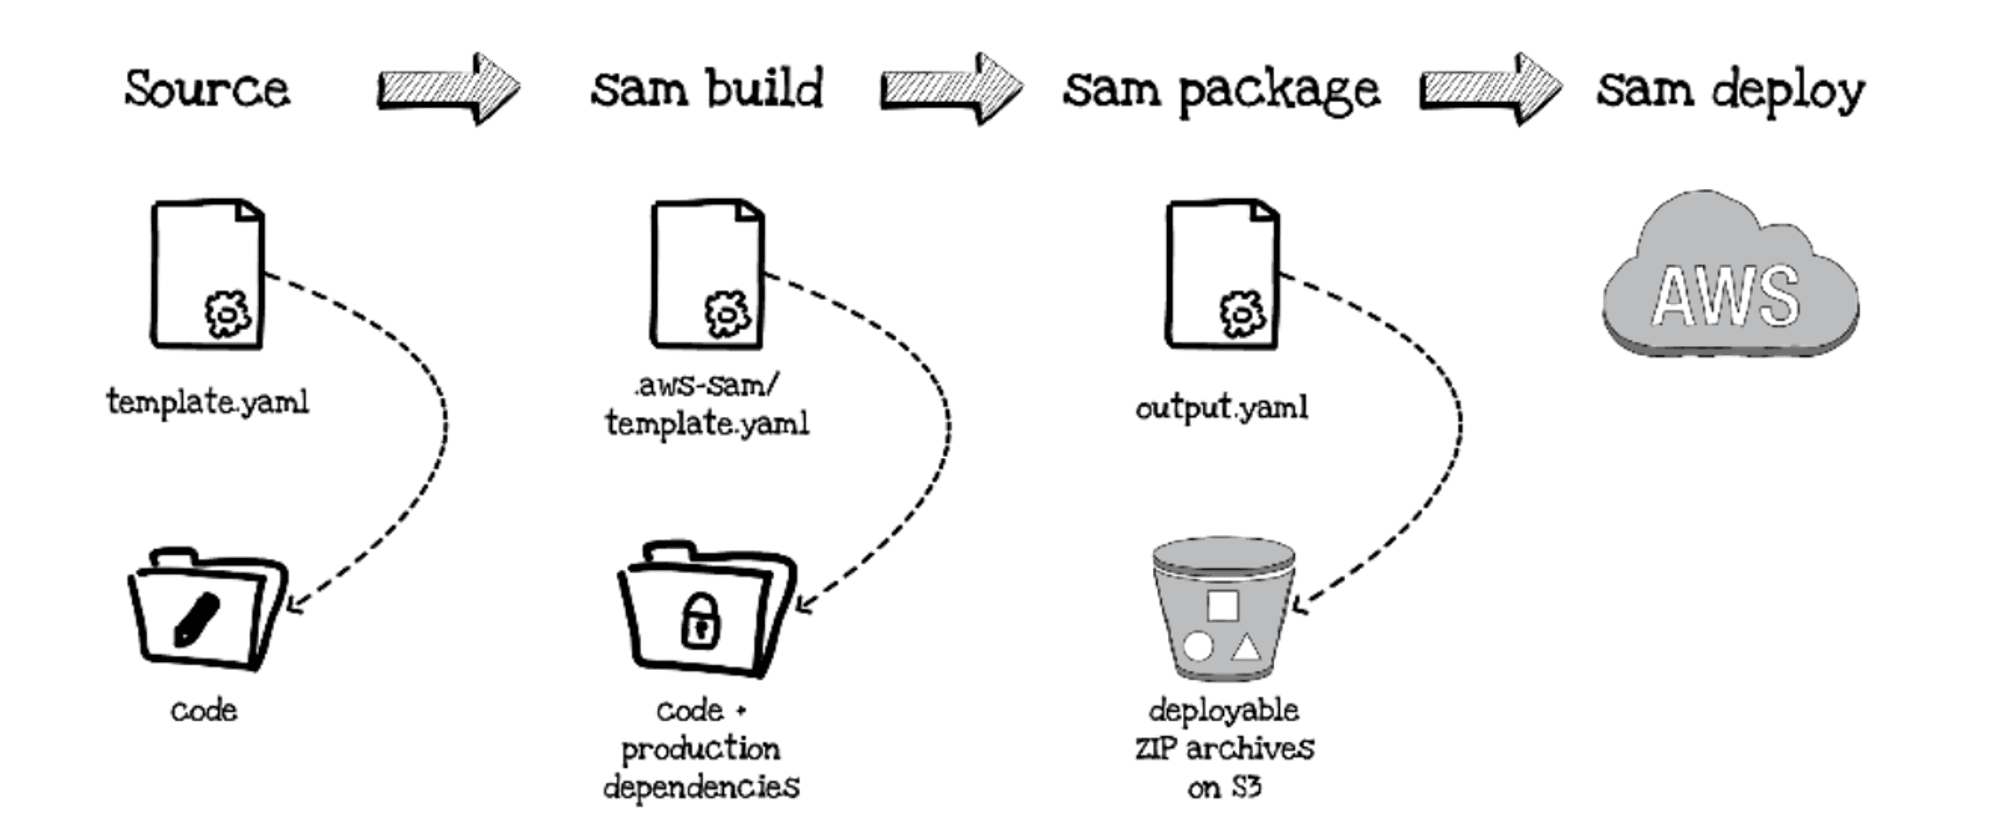 Deploying with SAM: ‘sam build’ creates a local self-contained copy, the ‘sam package’ function packages to S3, and ‘sam deploy’ creates a stack using CloudFormation.